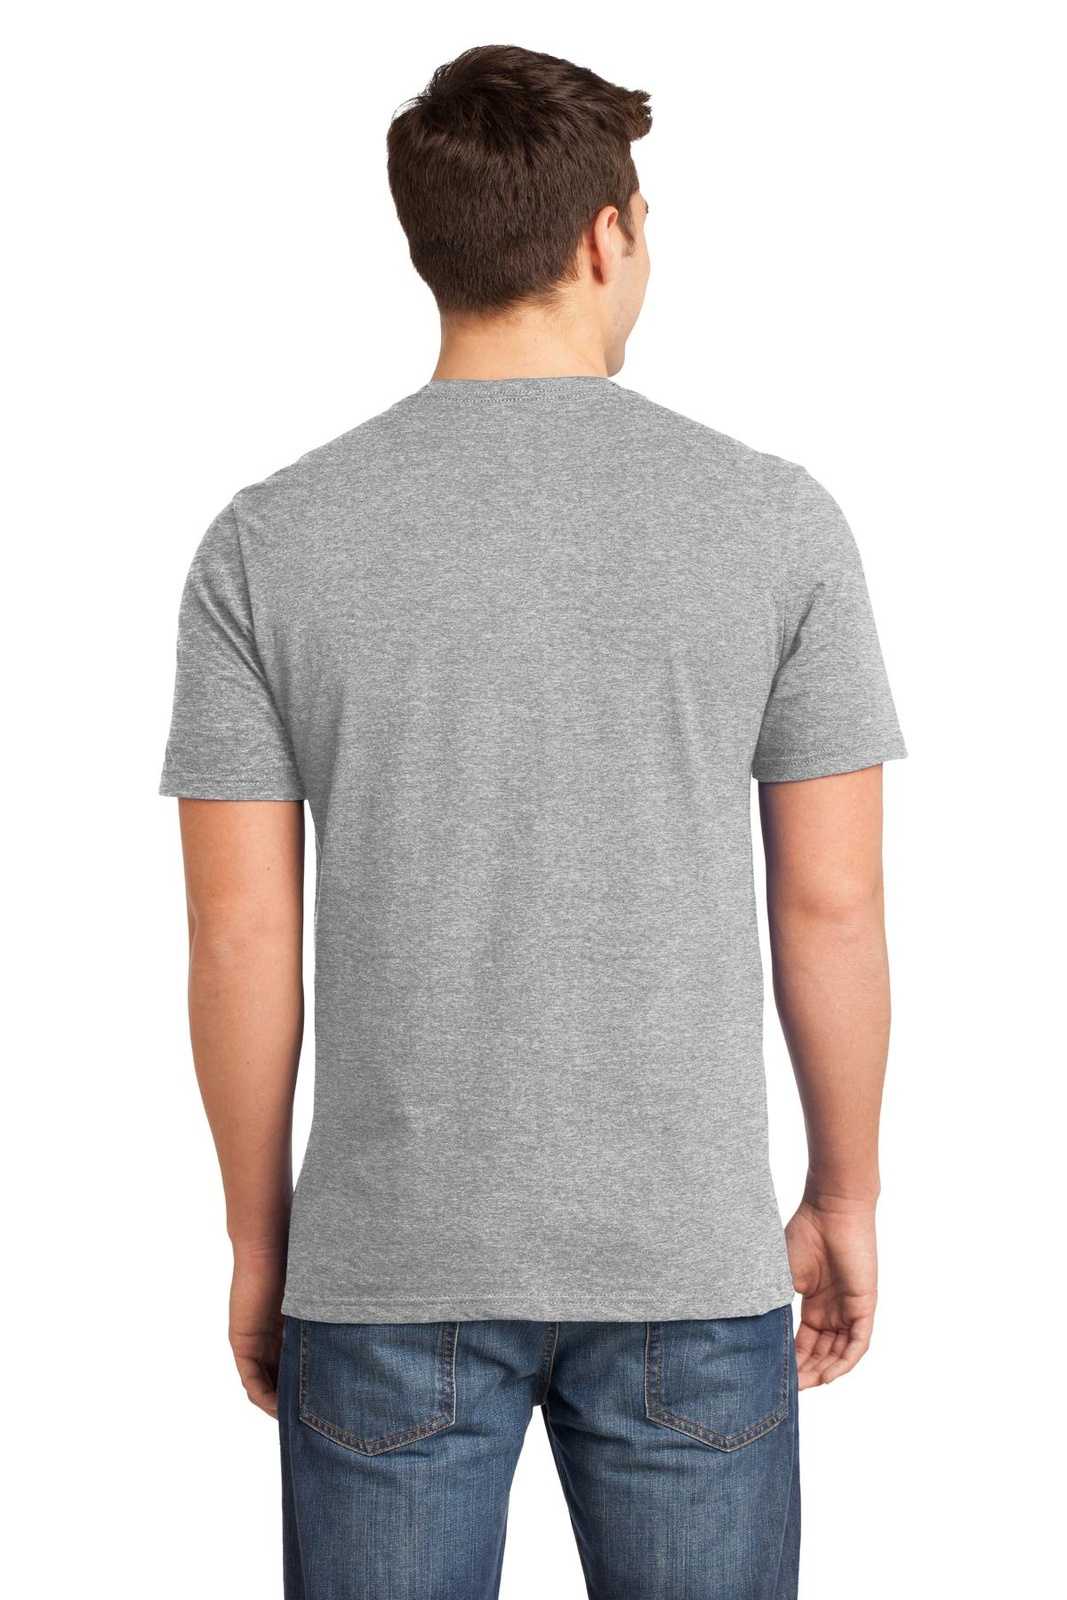 District DT6000 Very Important Tee - Light Heather Gray - HIT a Double - 1